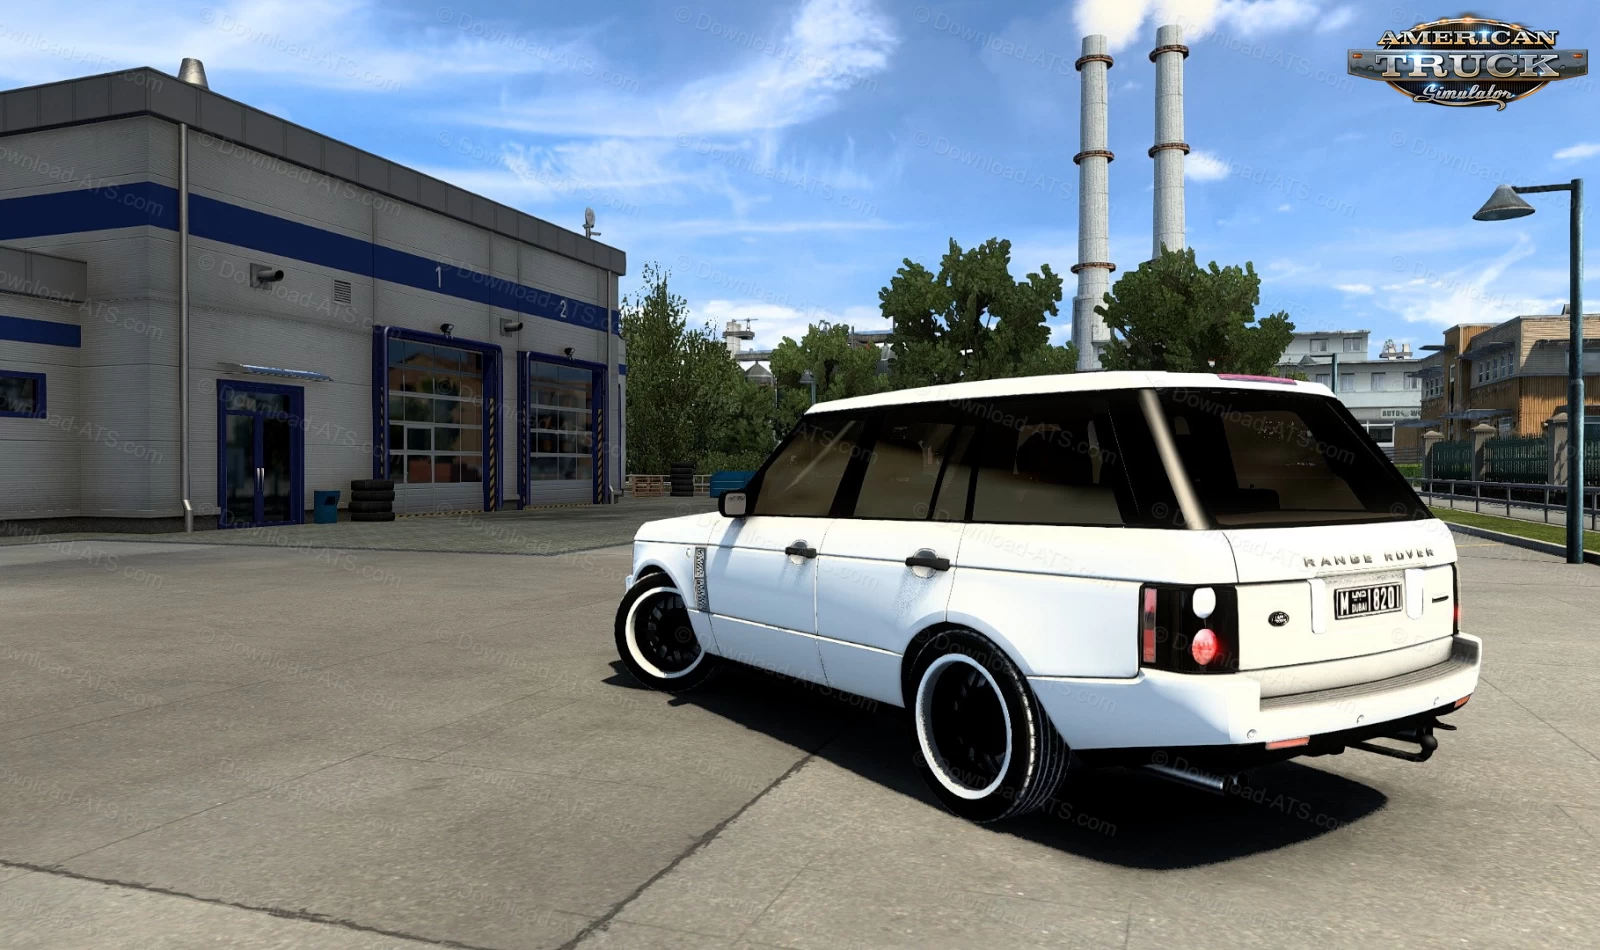 Range Rover Supercharged 2008 v7.5 (1.46.x) for ATS